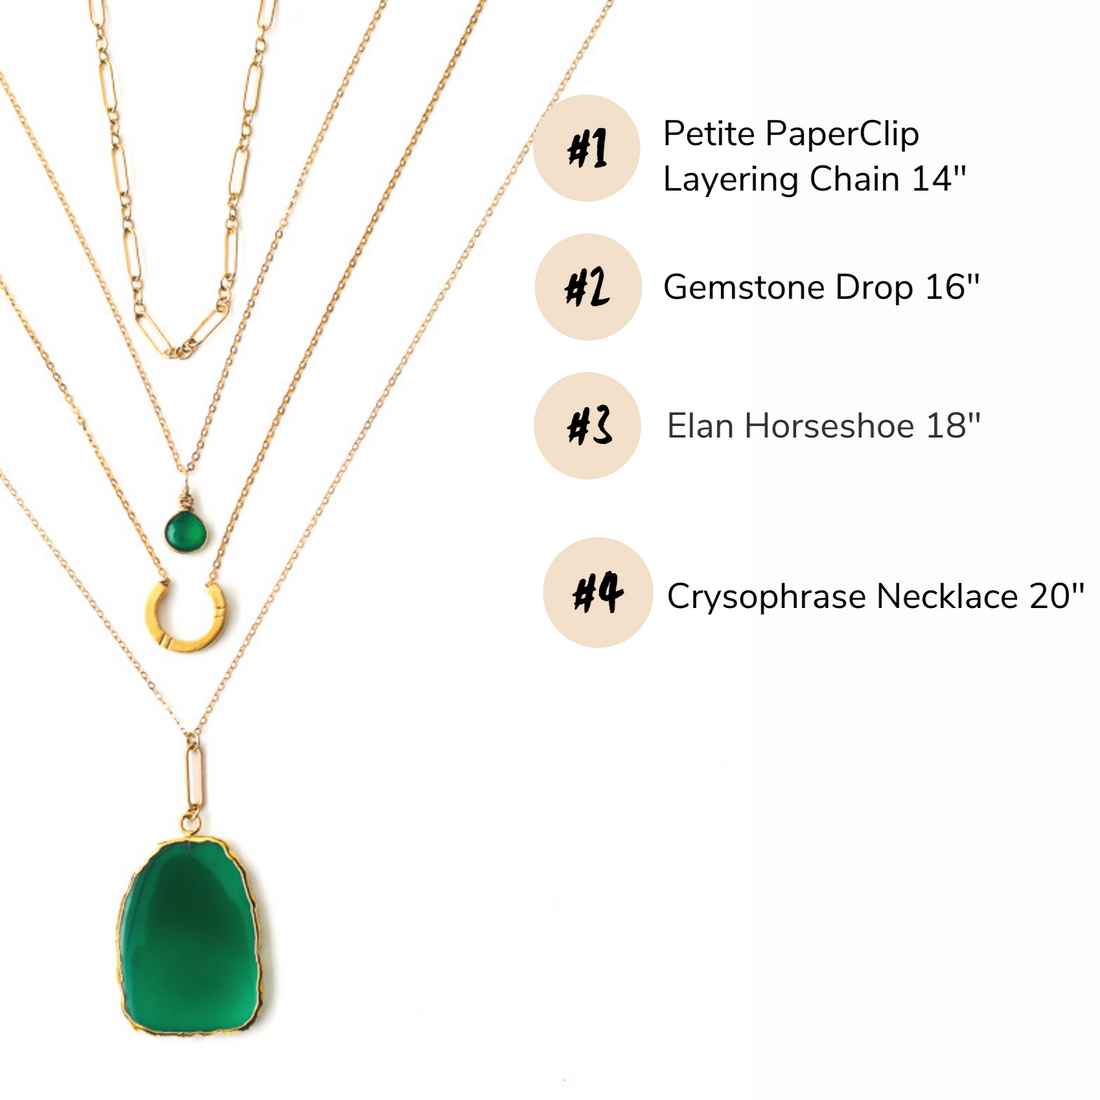 Limited Edition Green Onyx Necklace